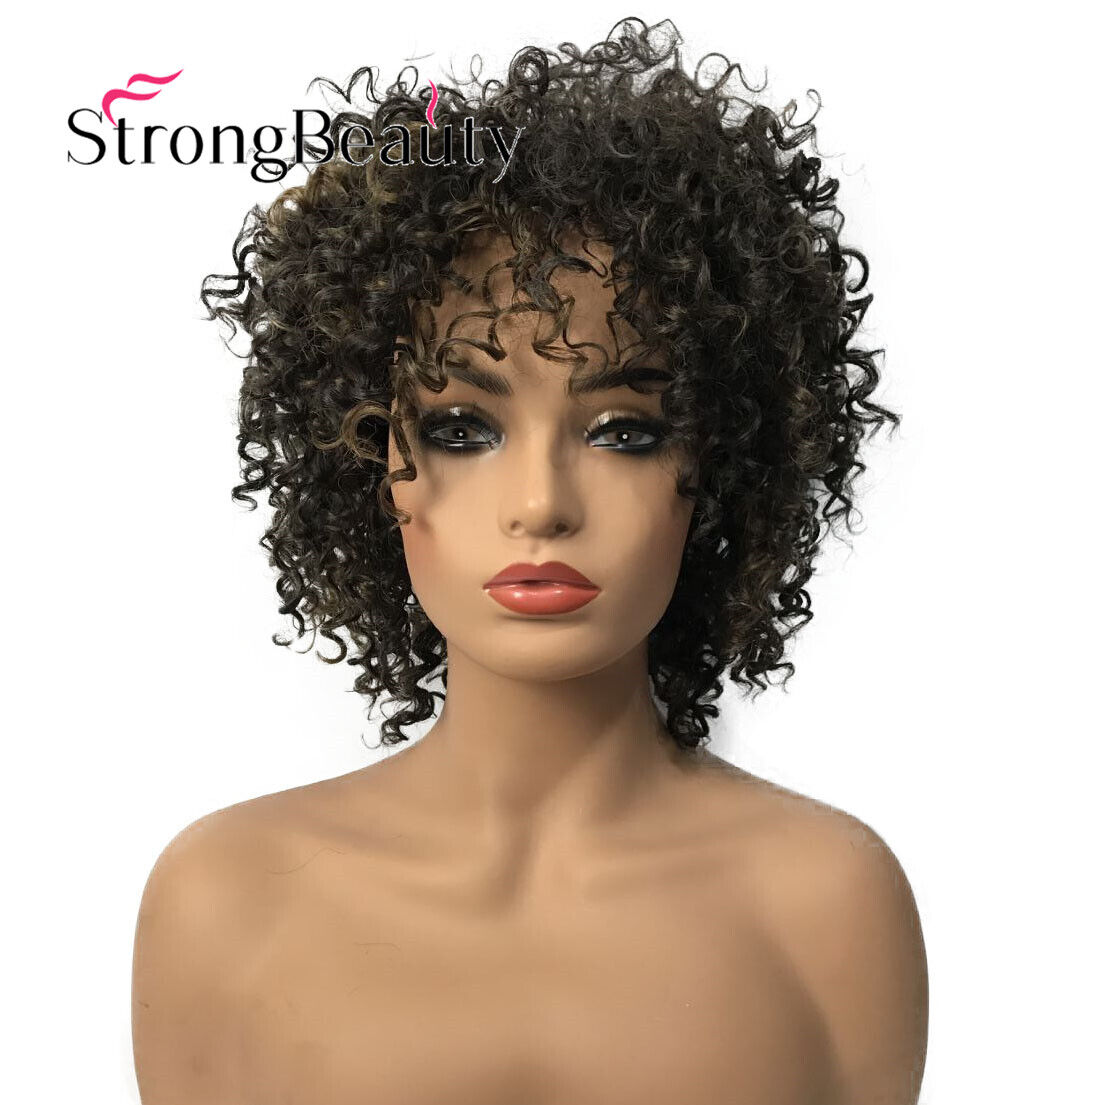 Women Wigs Medium Curly Dark Brown Wigs Synthetic Wig Remy Rapunzel Wigs Colored